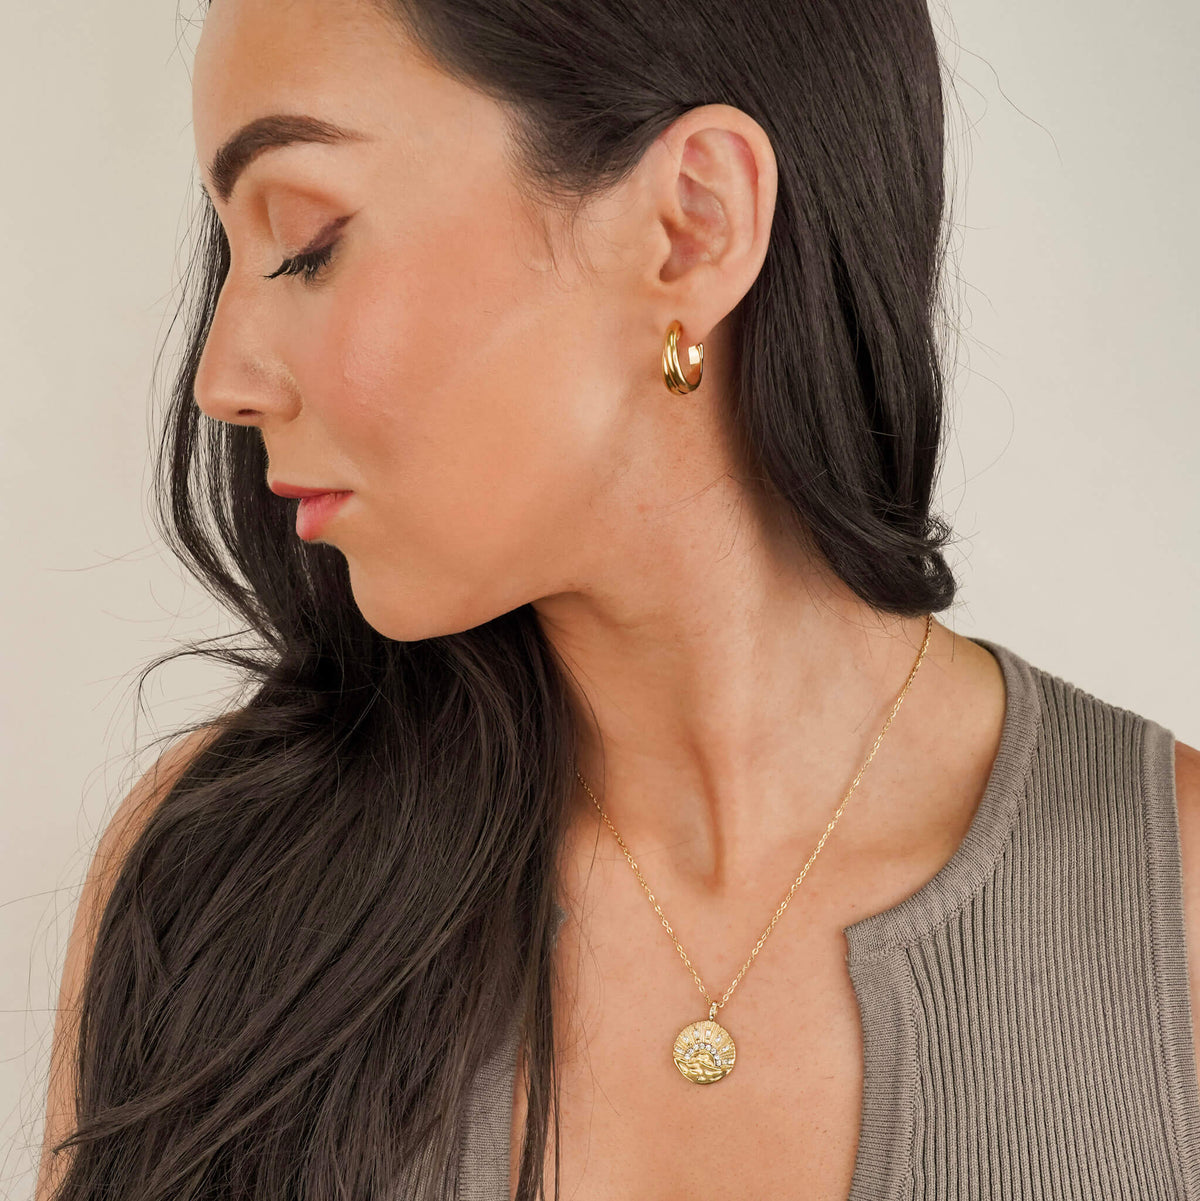 the new horizons necklace empowers us to welcome new horizons and new challenges. It guides us towards newness with confidence and resilience. This necklace is perfect for someone who is entering into a new chapter of her life. 